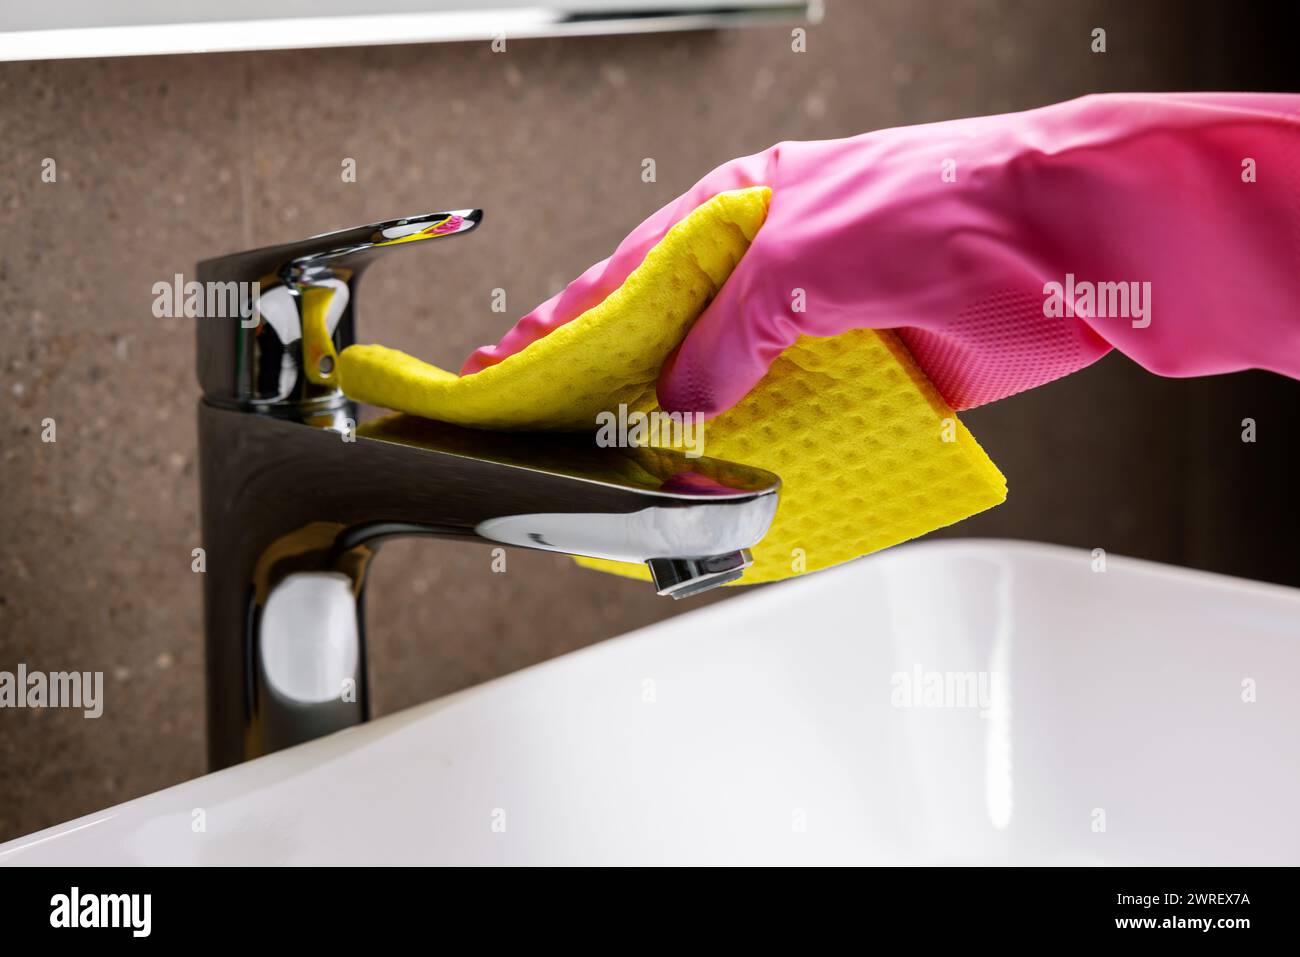 cleaning service and chores. hand with rubber glove and sponge cleans the bathroom sink chrome faucet Stock Photo